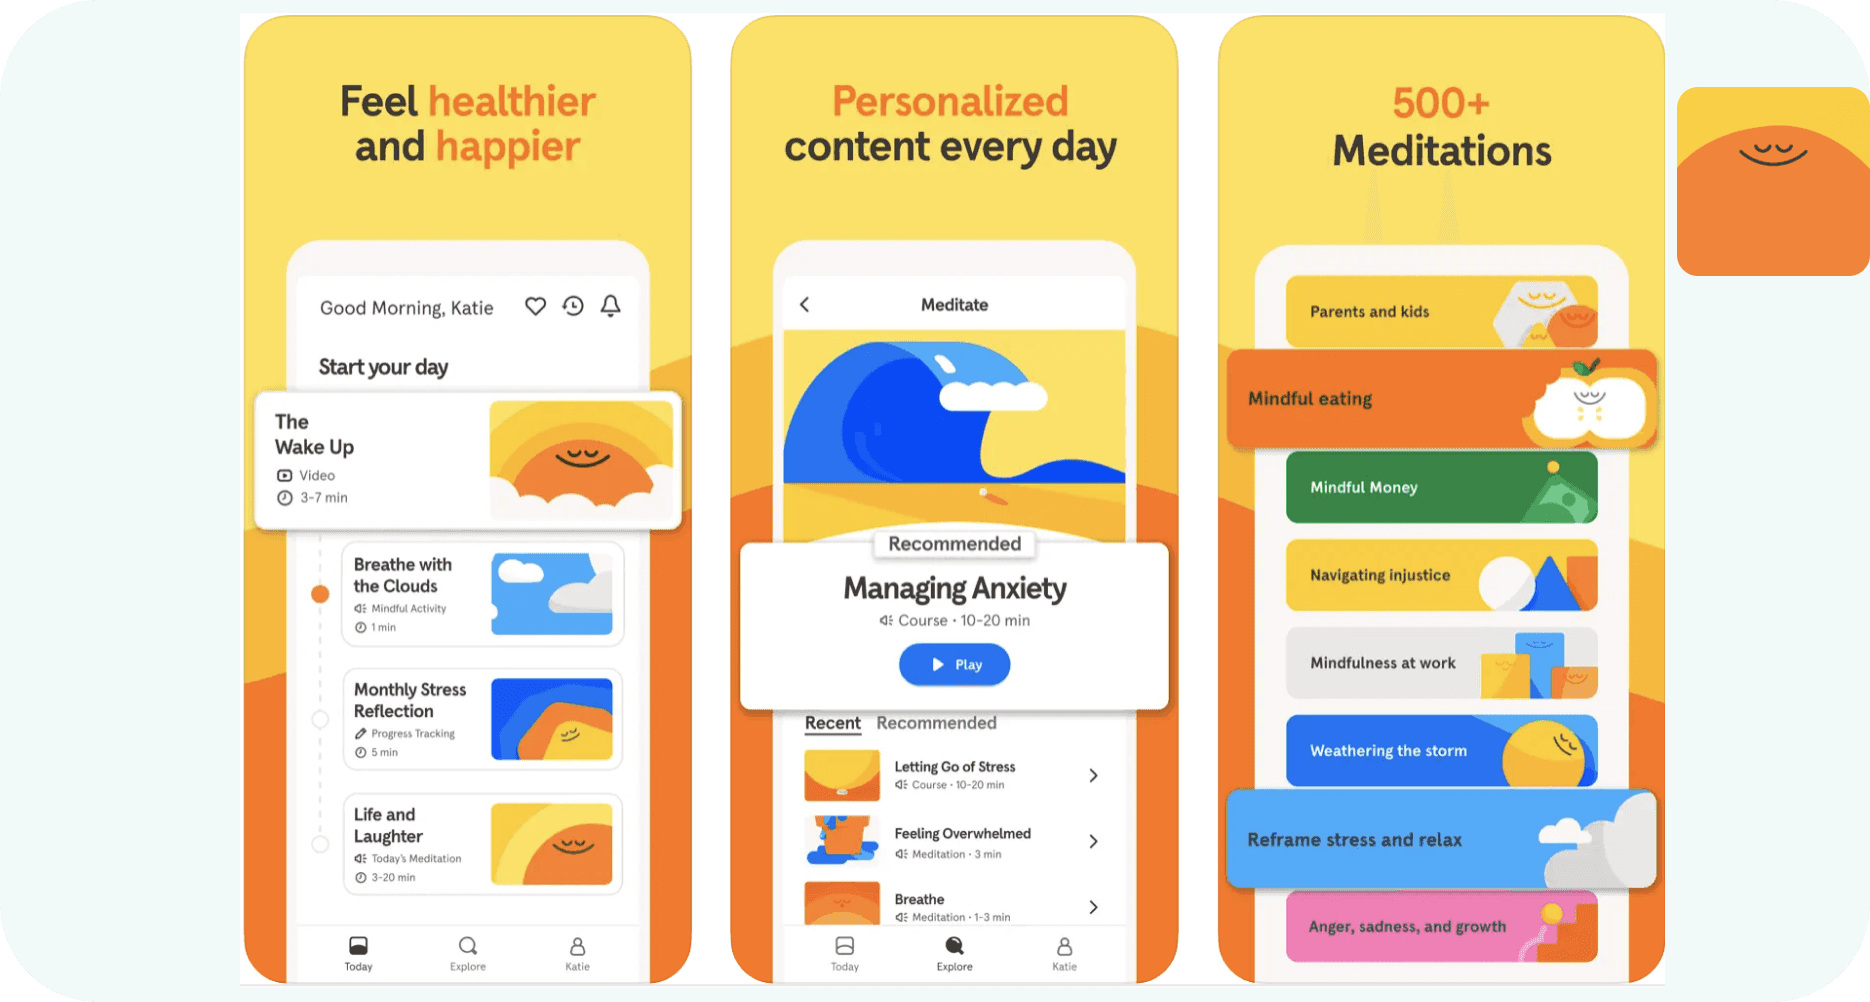 App screenshots from AppStore for Headspace featuring self improvement features